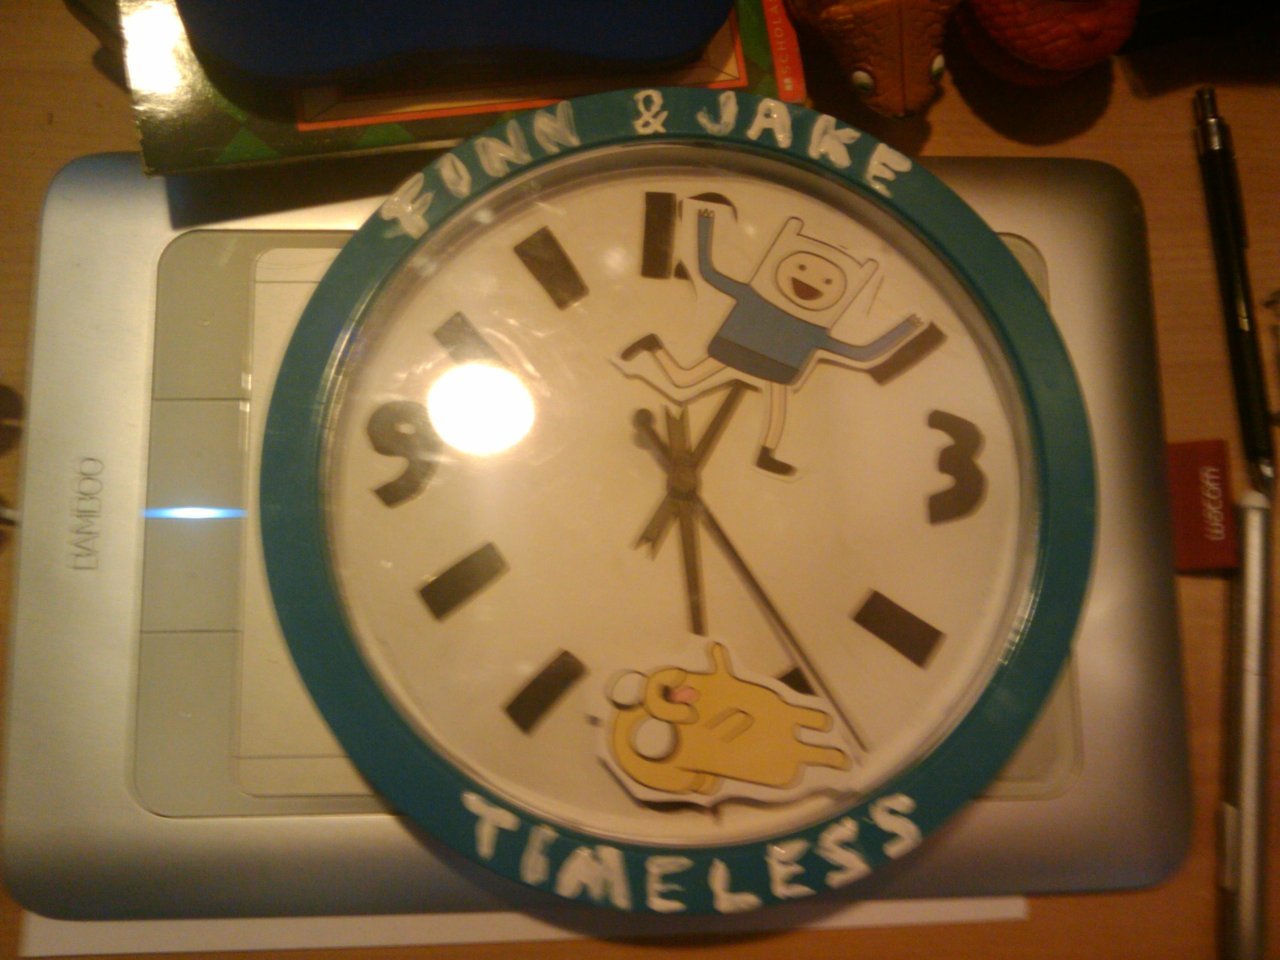 I finally finished that Adventure Time clock I was working on. It took so long mostly